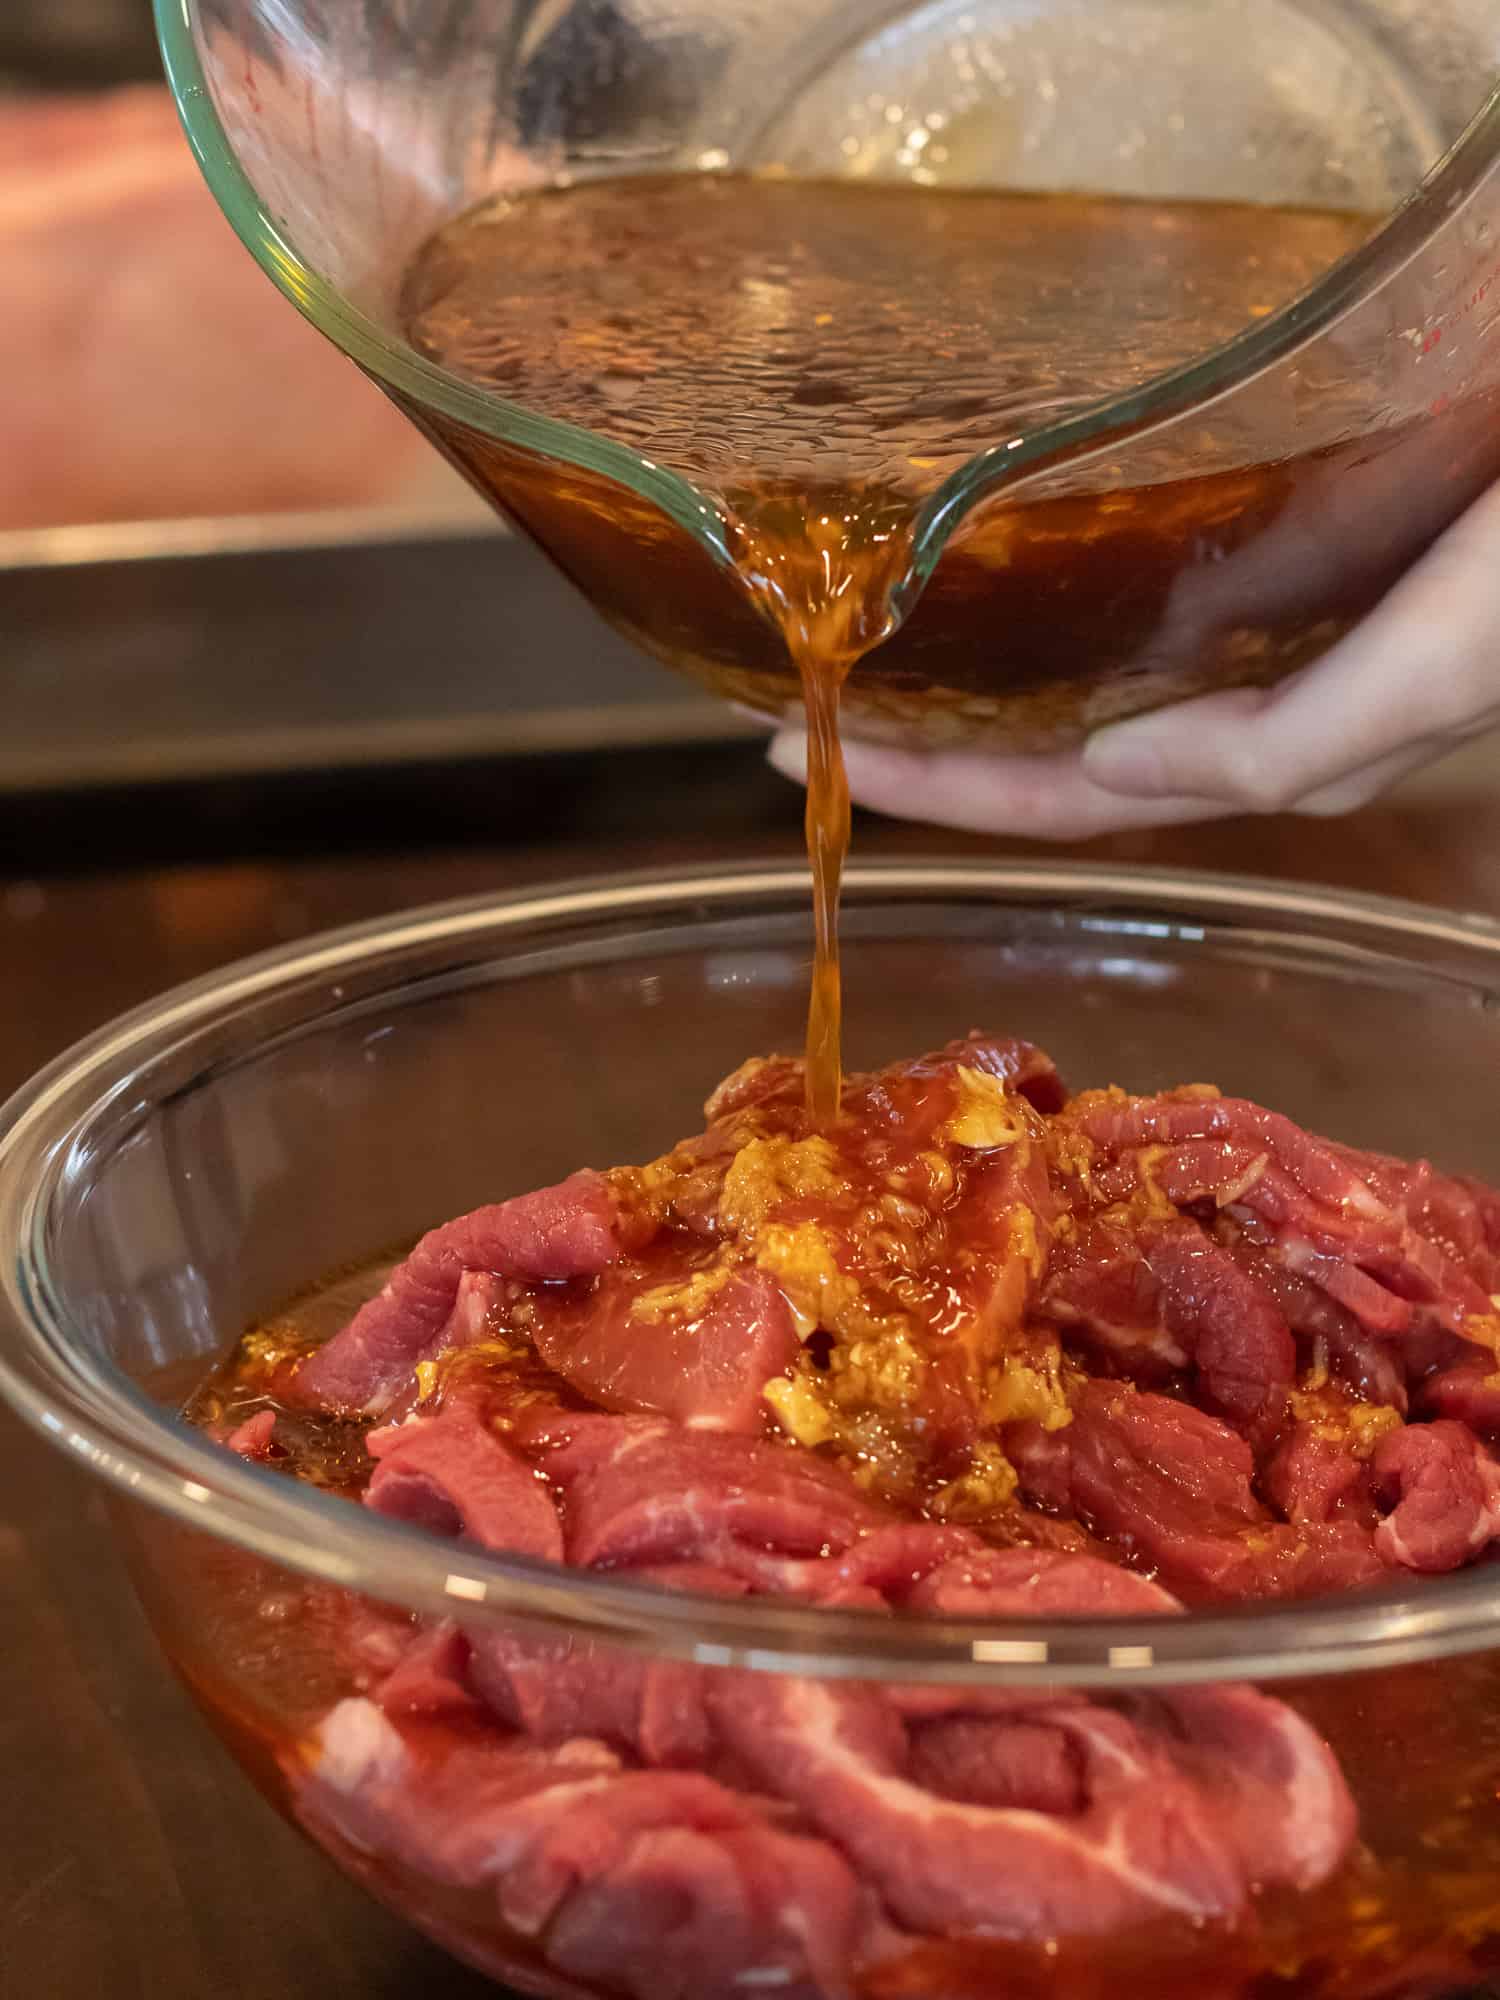 Pouring the Asian marinade mixture all over the sliced beef.